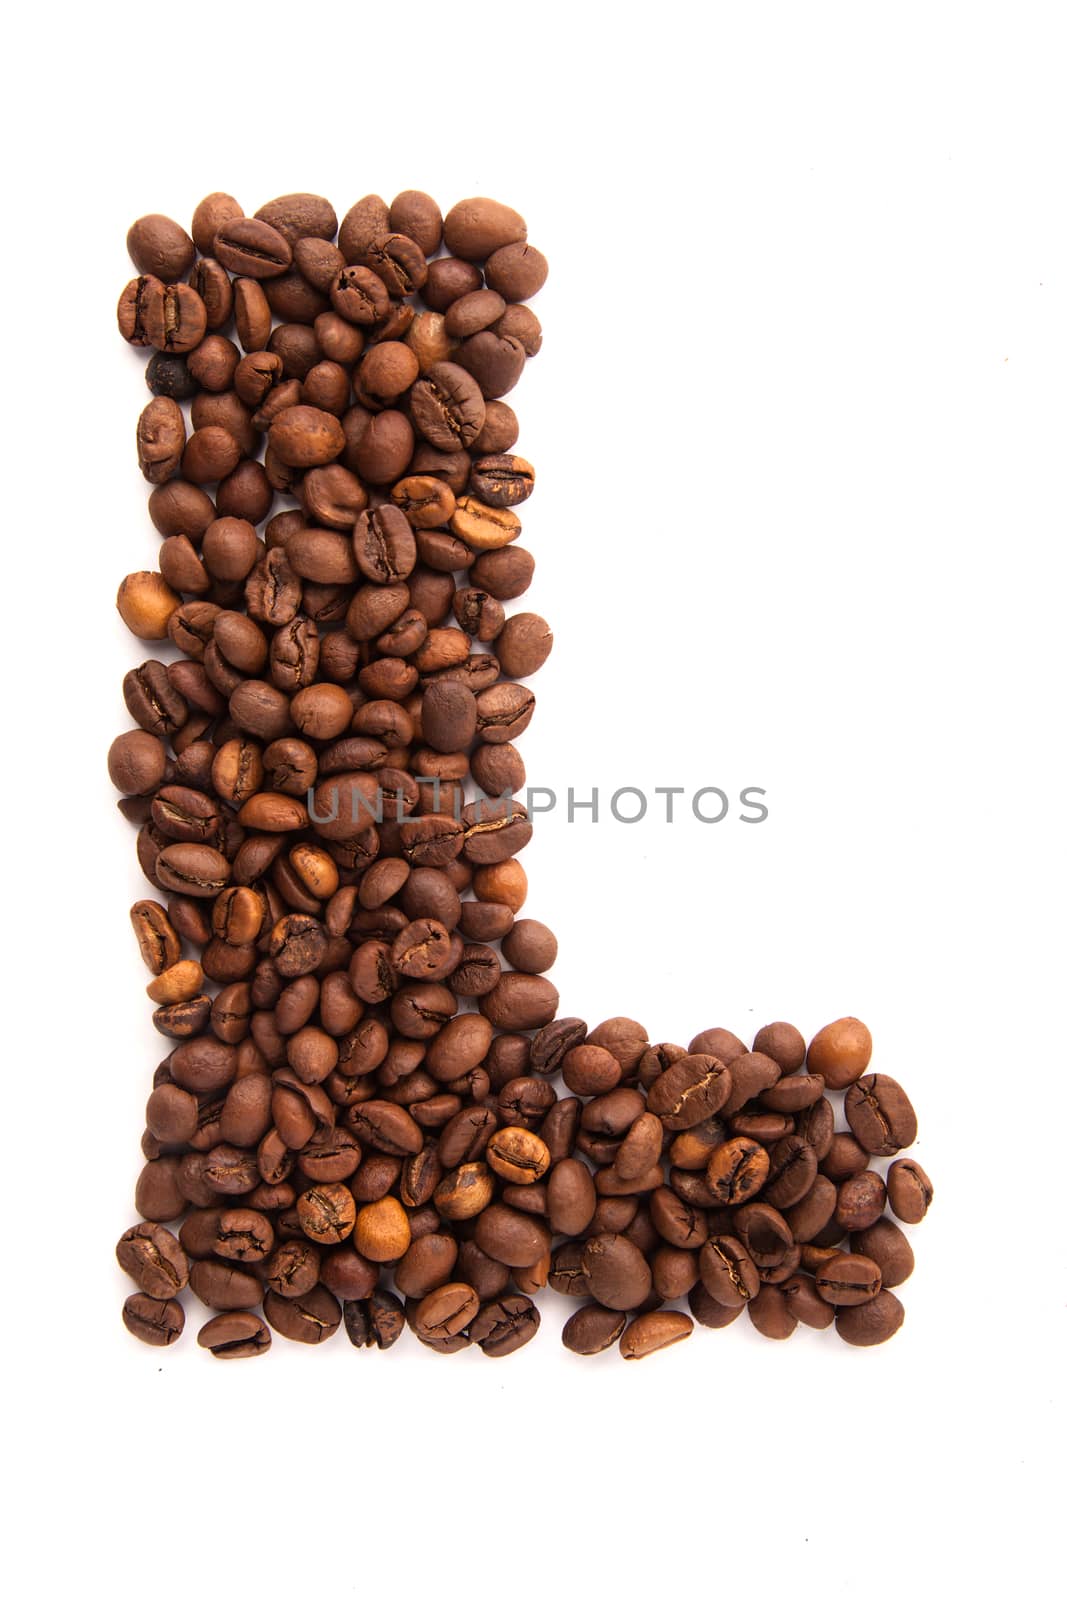 Alphabet letter L of roasted coffee beans isolated on white background